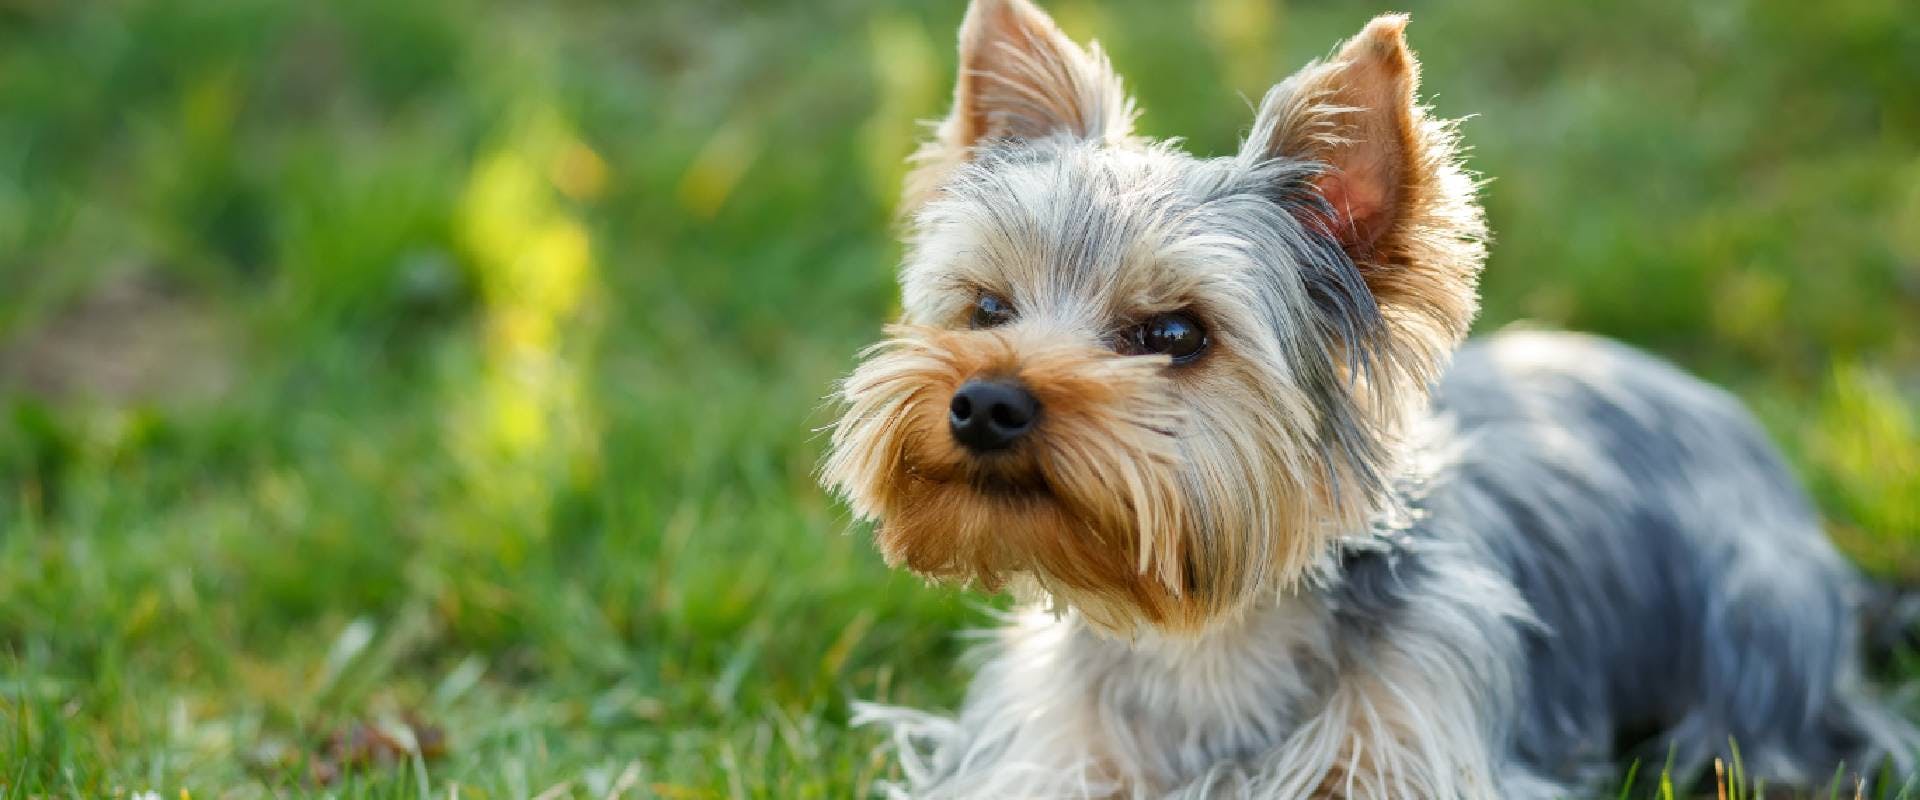 Yorkshire Terrier - a descendent of the Paisley Terrier